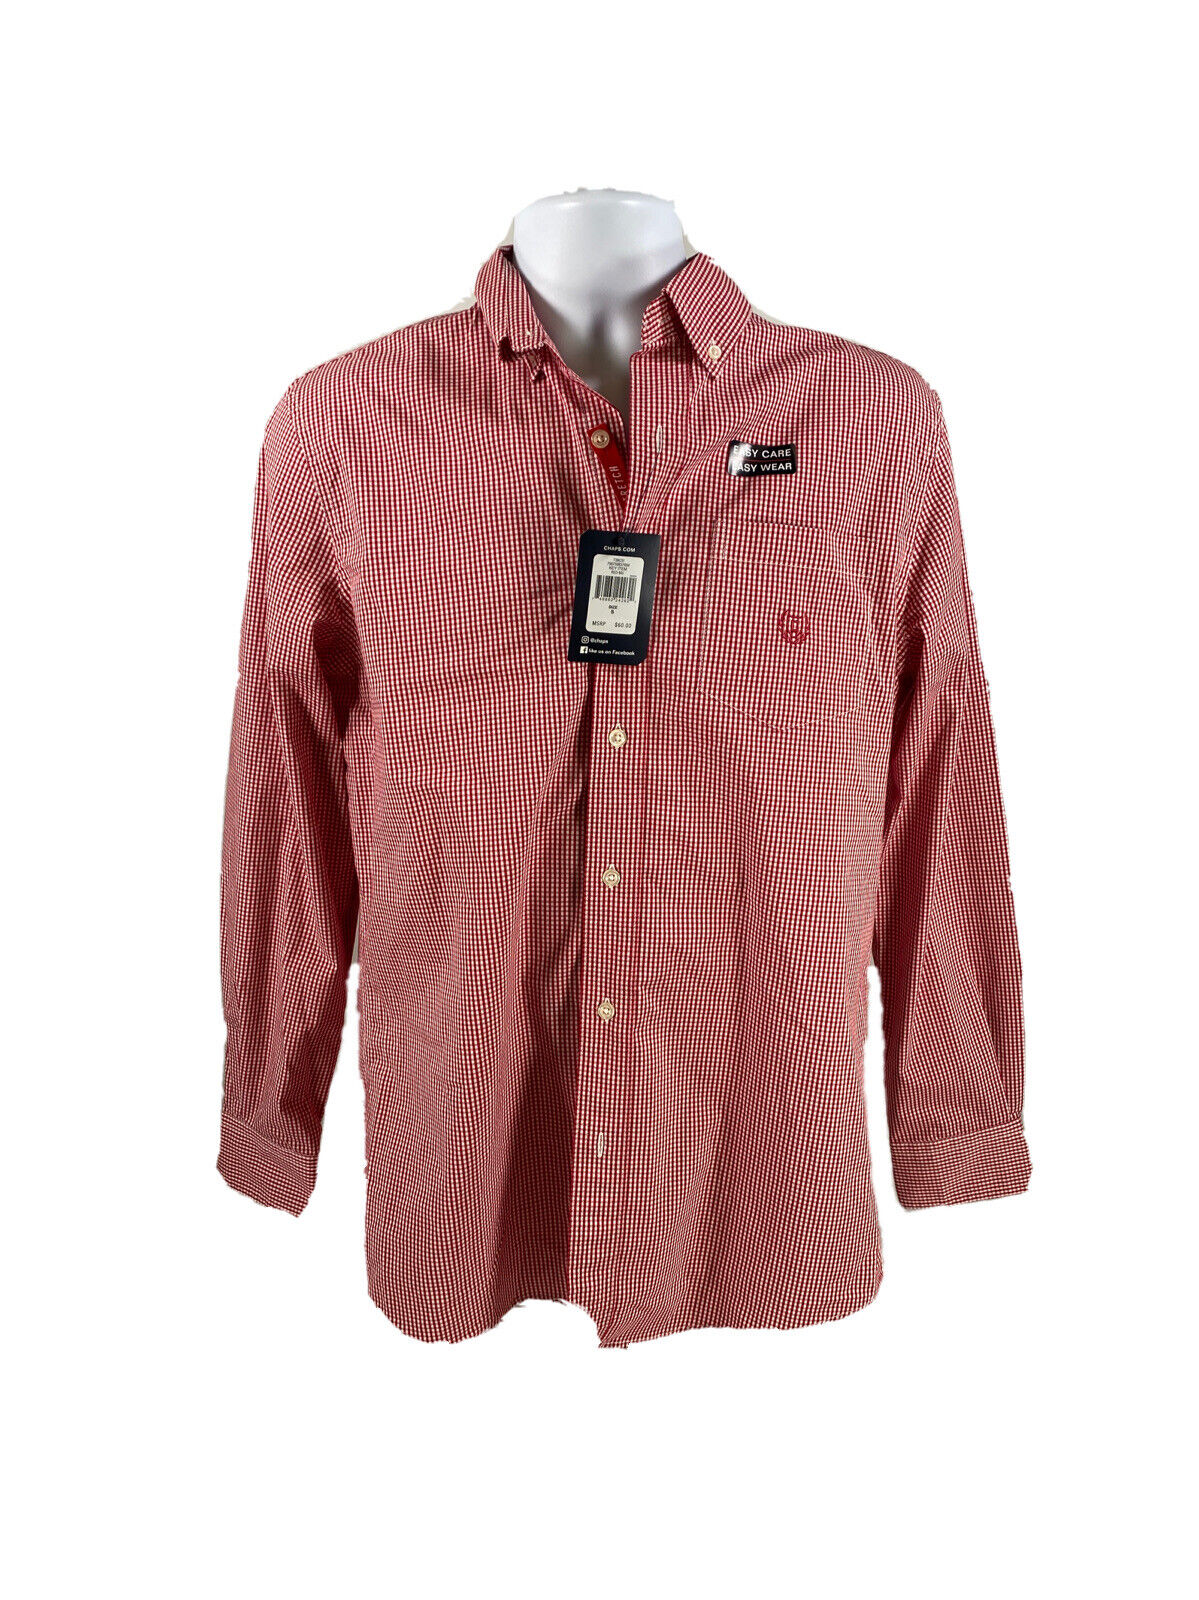 NEW Chaps Men's Red Plaid Stretch Easy Care Button Down Casual Shirt - S